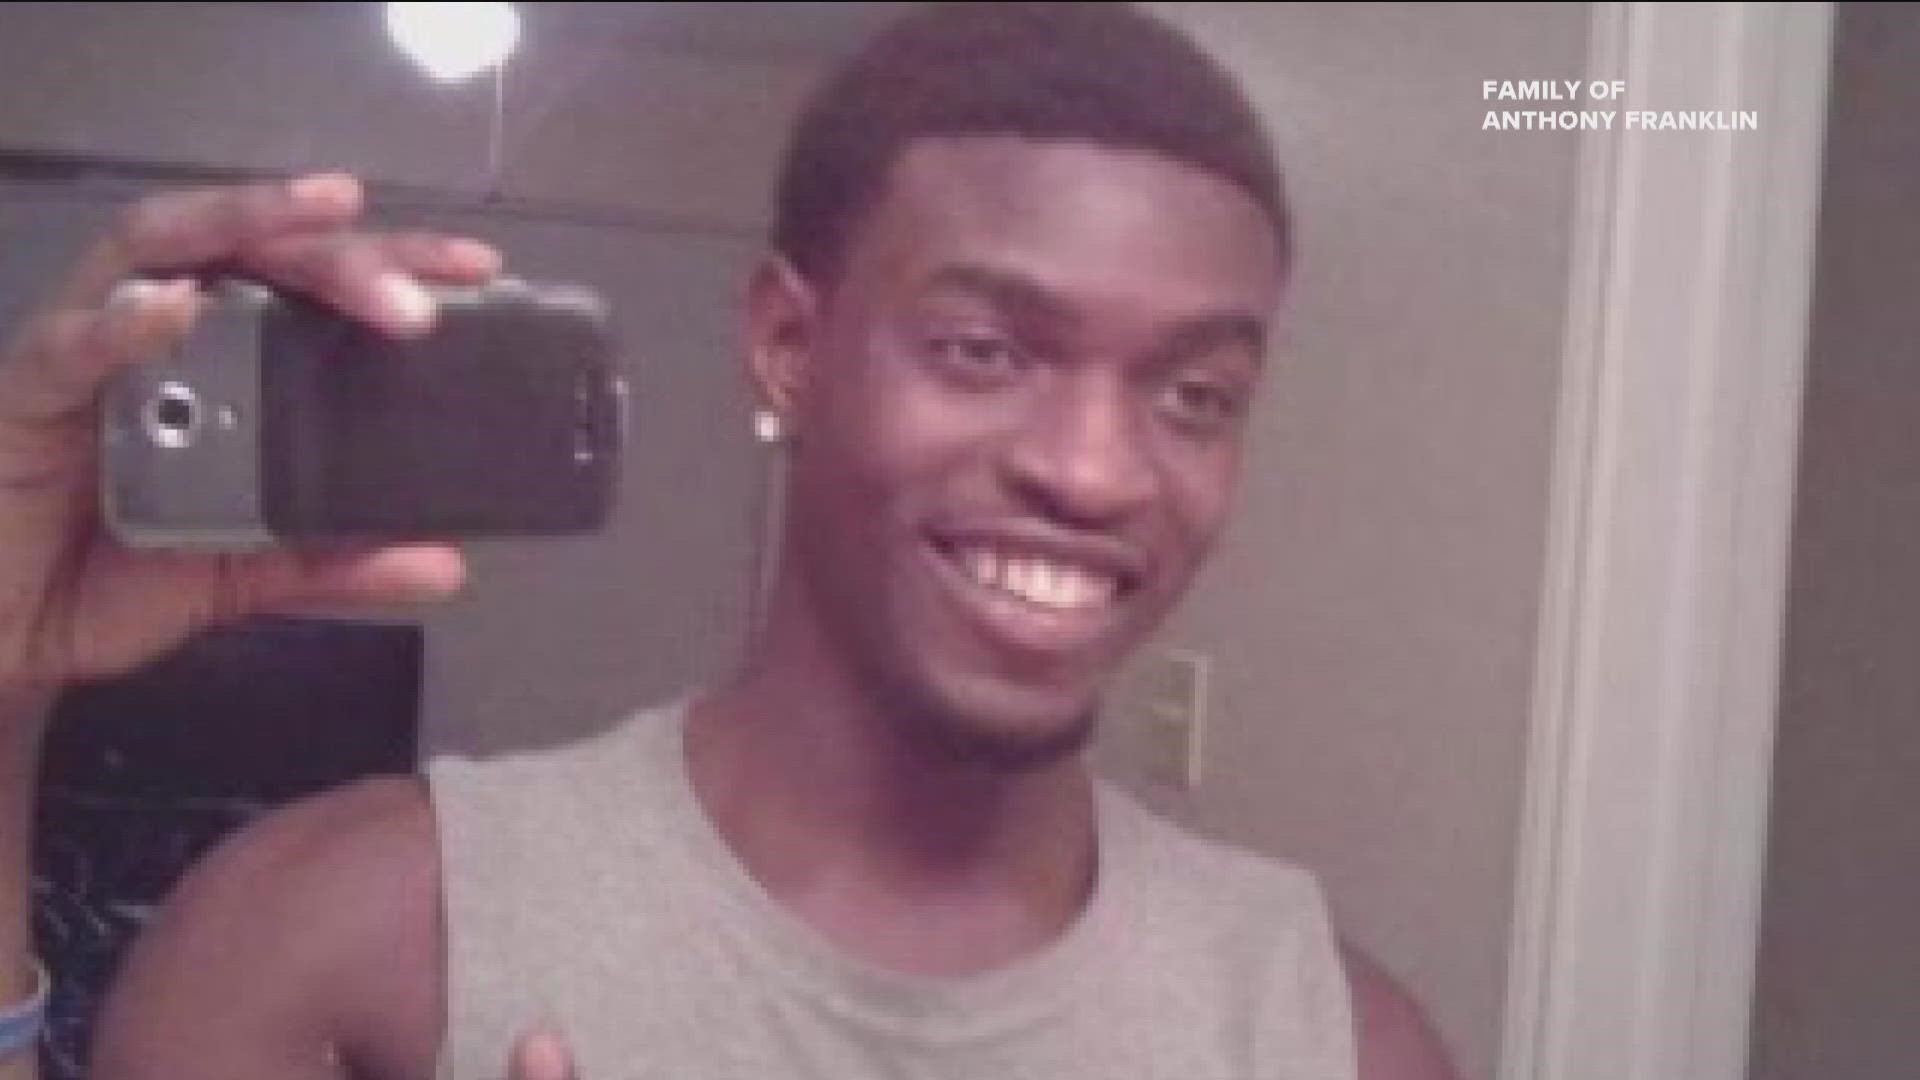 Last month, three Austin police officers shot and killed 31-year-old Anthony Franklin after a short chase.